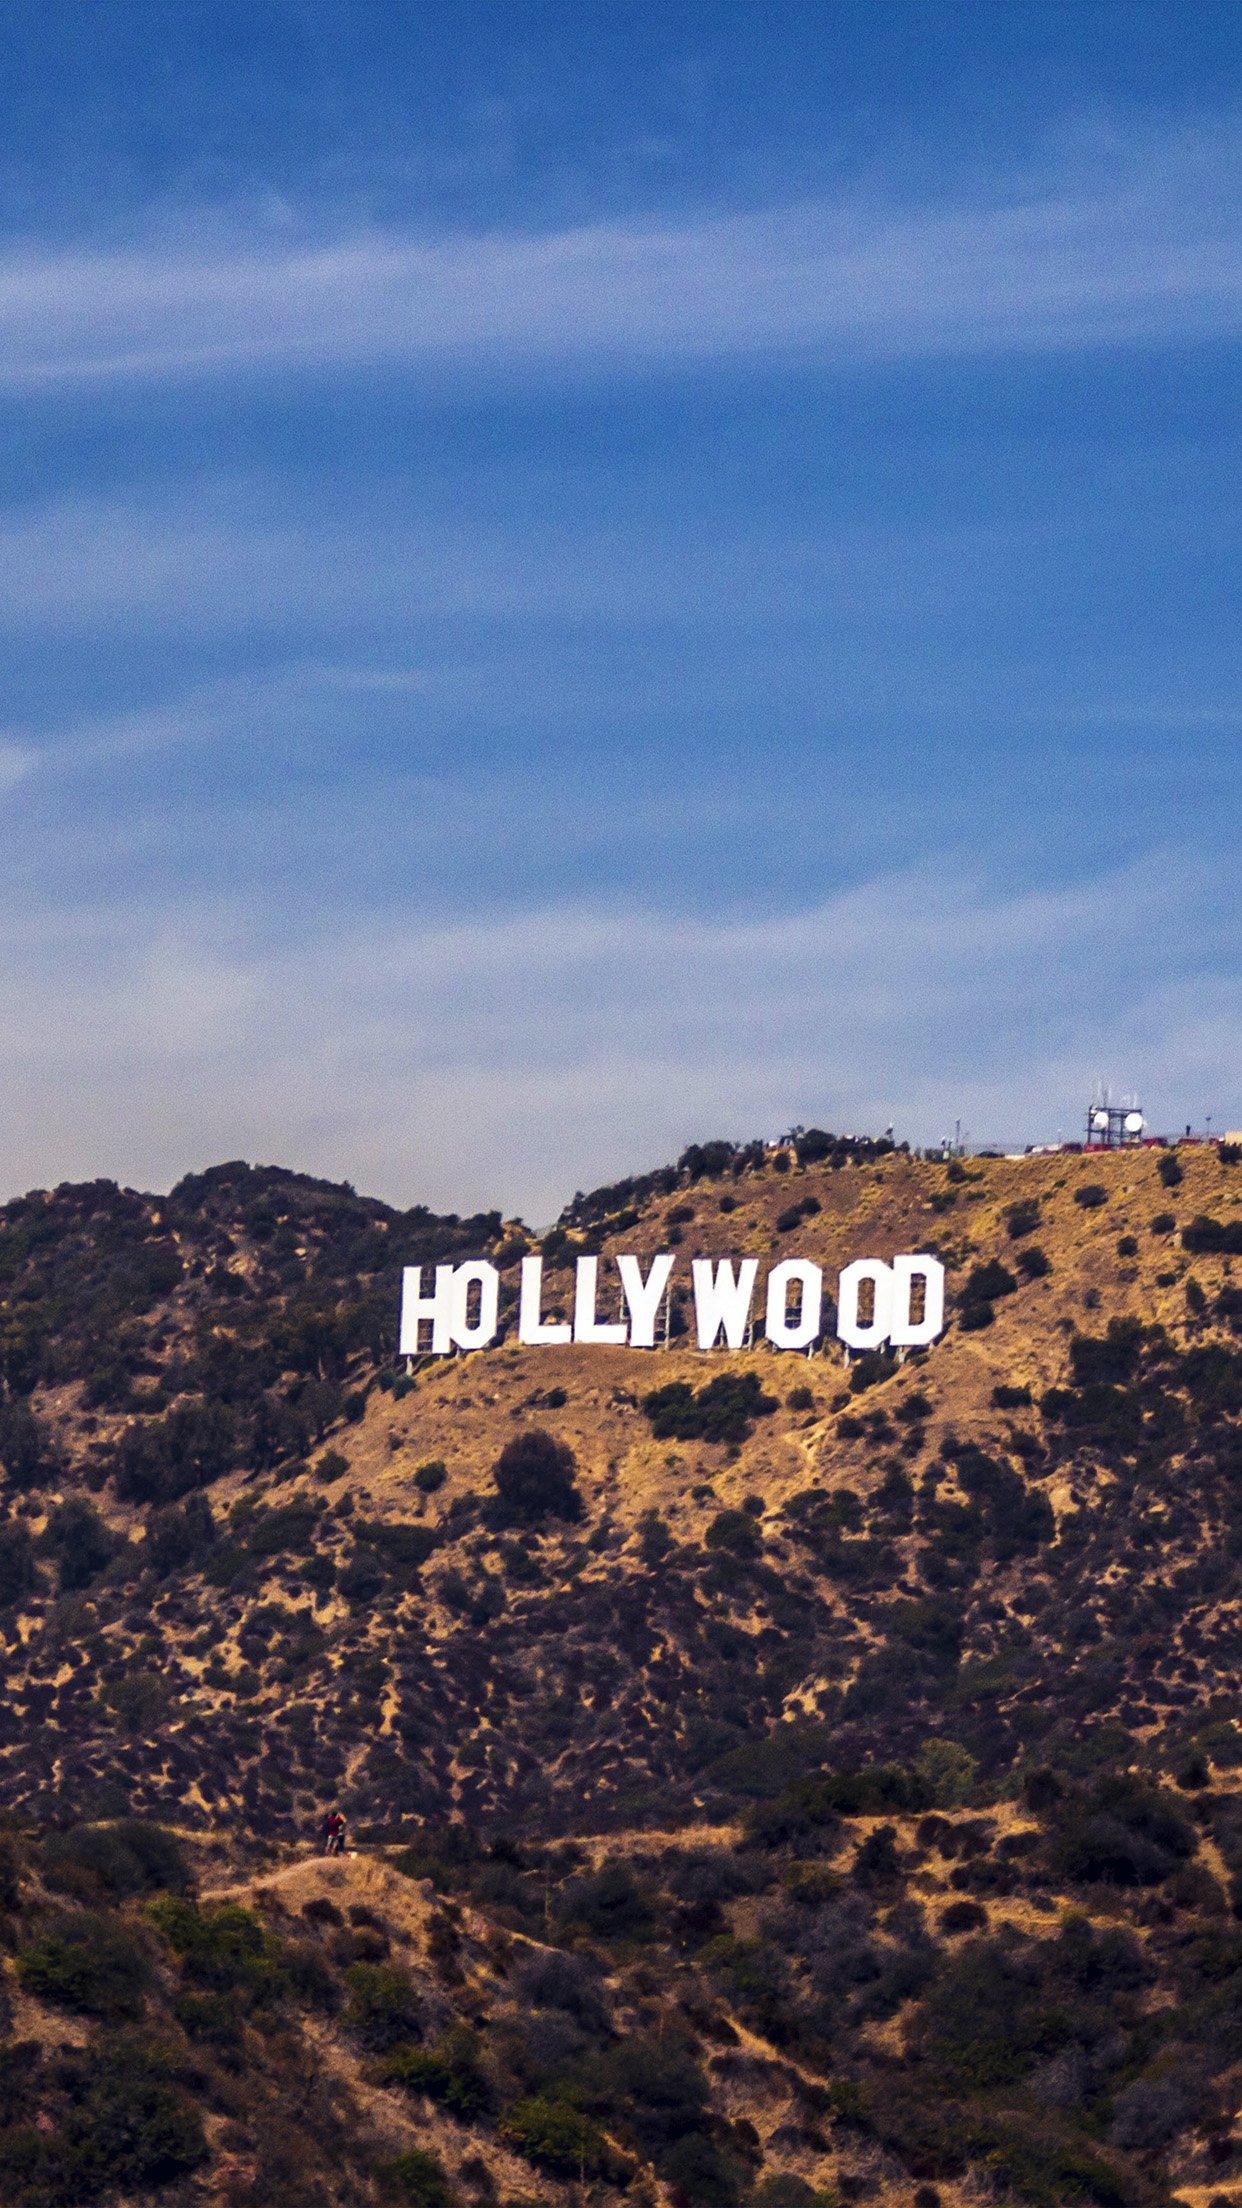 Iphone 6 - Hollywood Sign - HD Wallpaper 